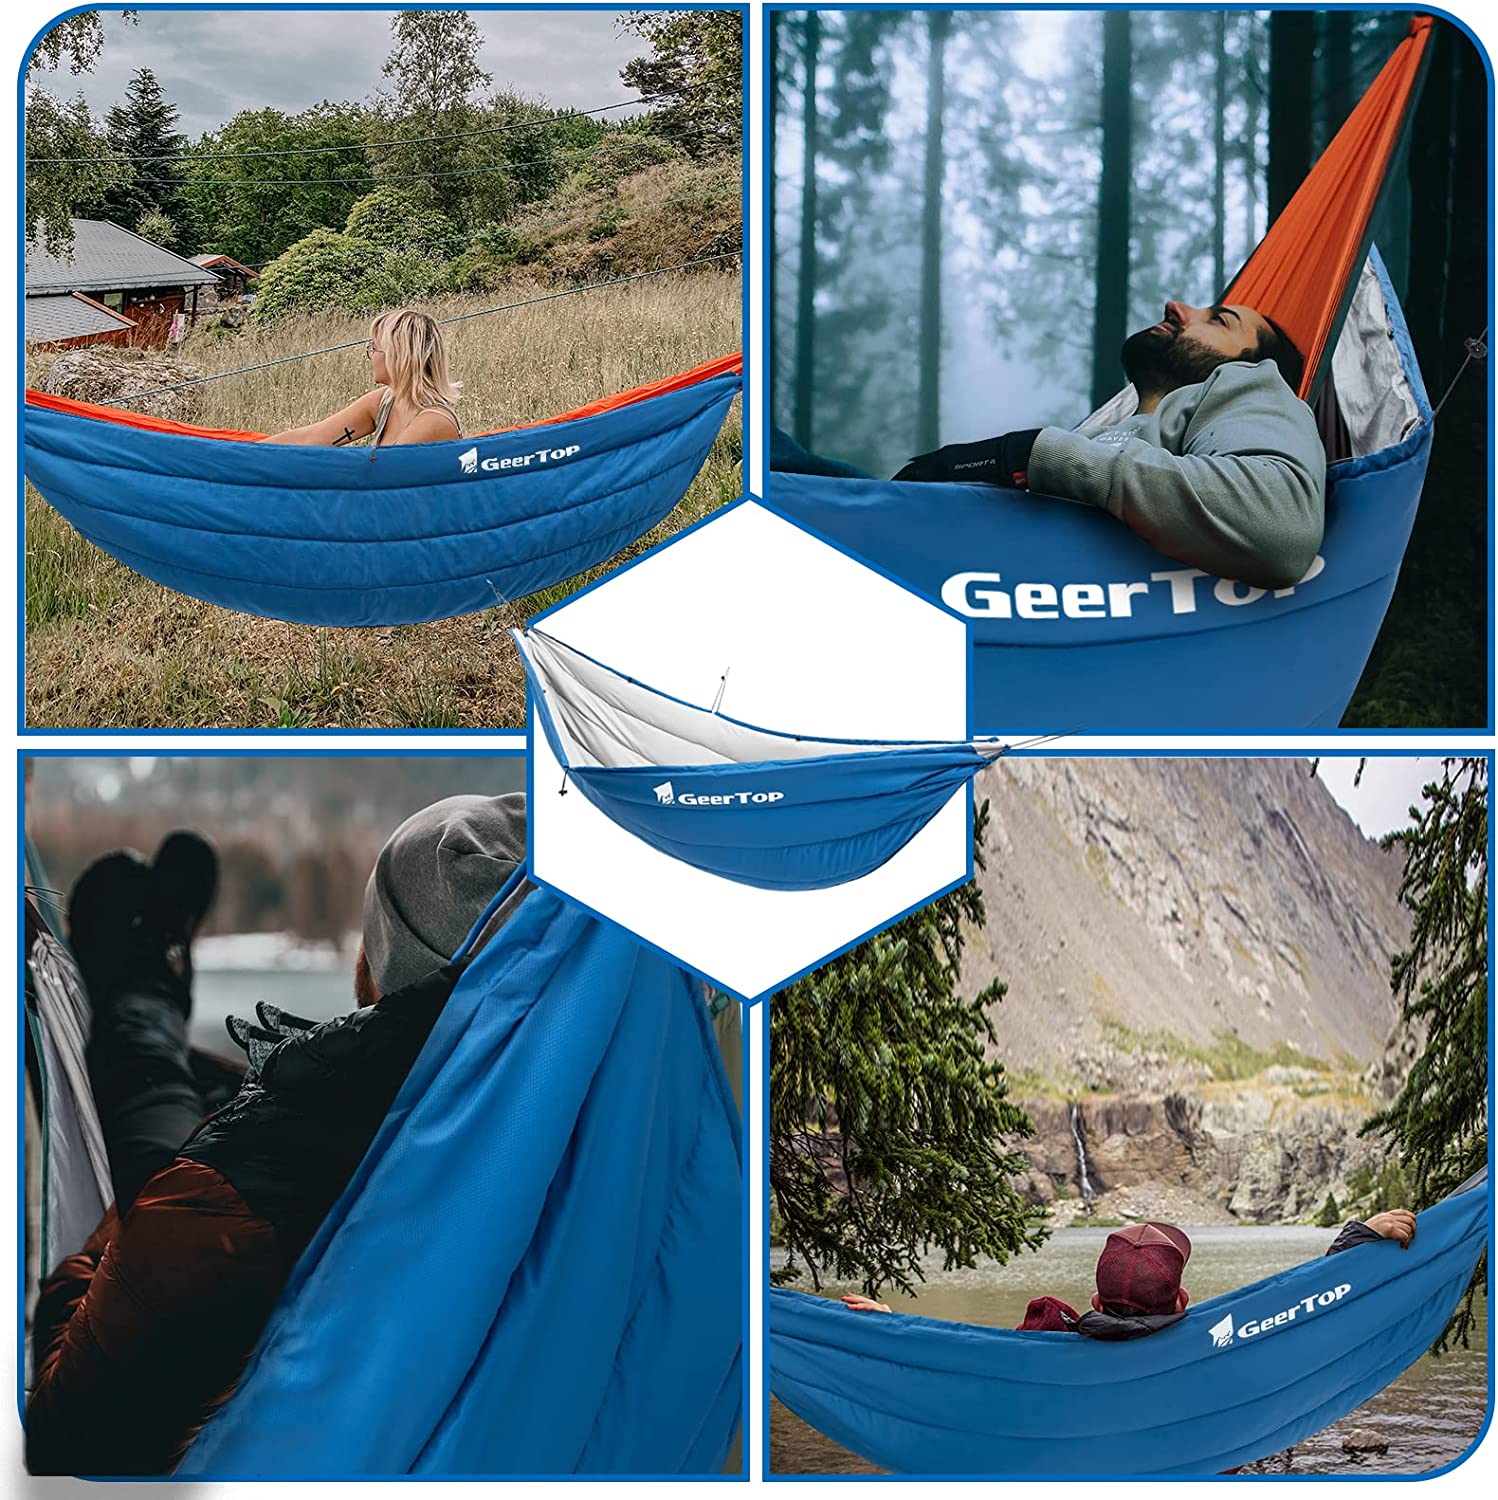 GEERTOP Lightweight Hammock Underquilt Full Length Camping Quilt for Hammocks Warm 3 - 4 Seasons Under Quilt for Outdoor Camp, Backpacking, Hiking Travel